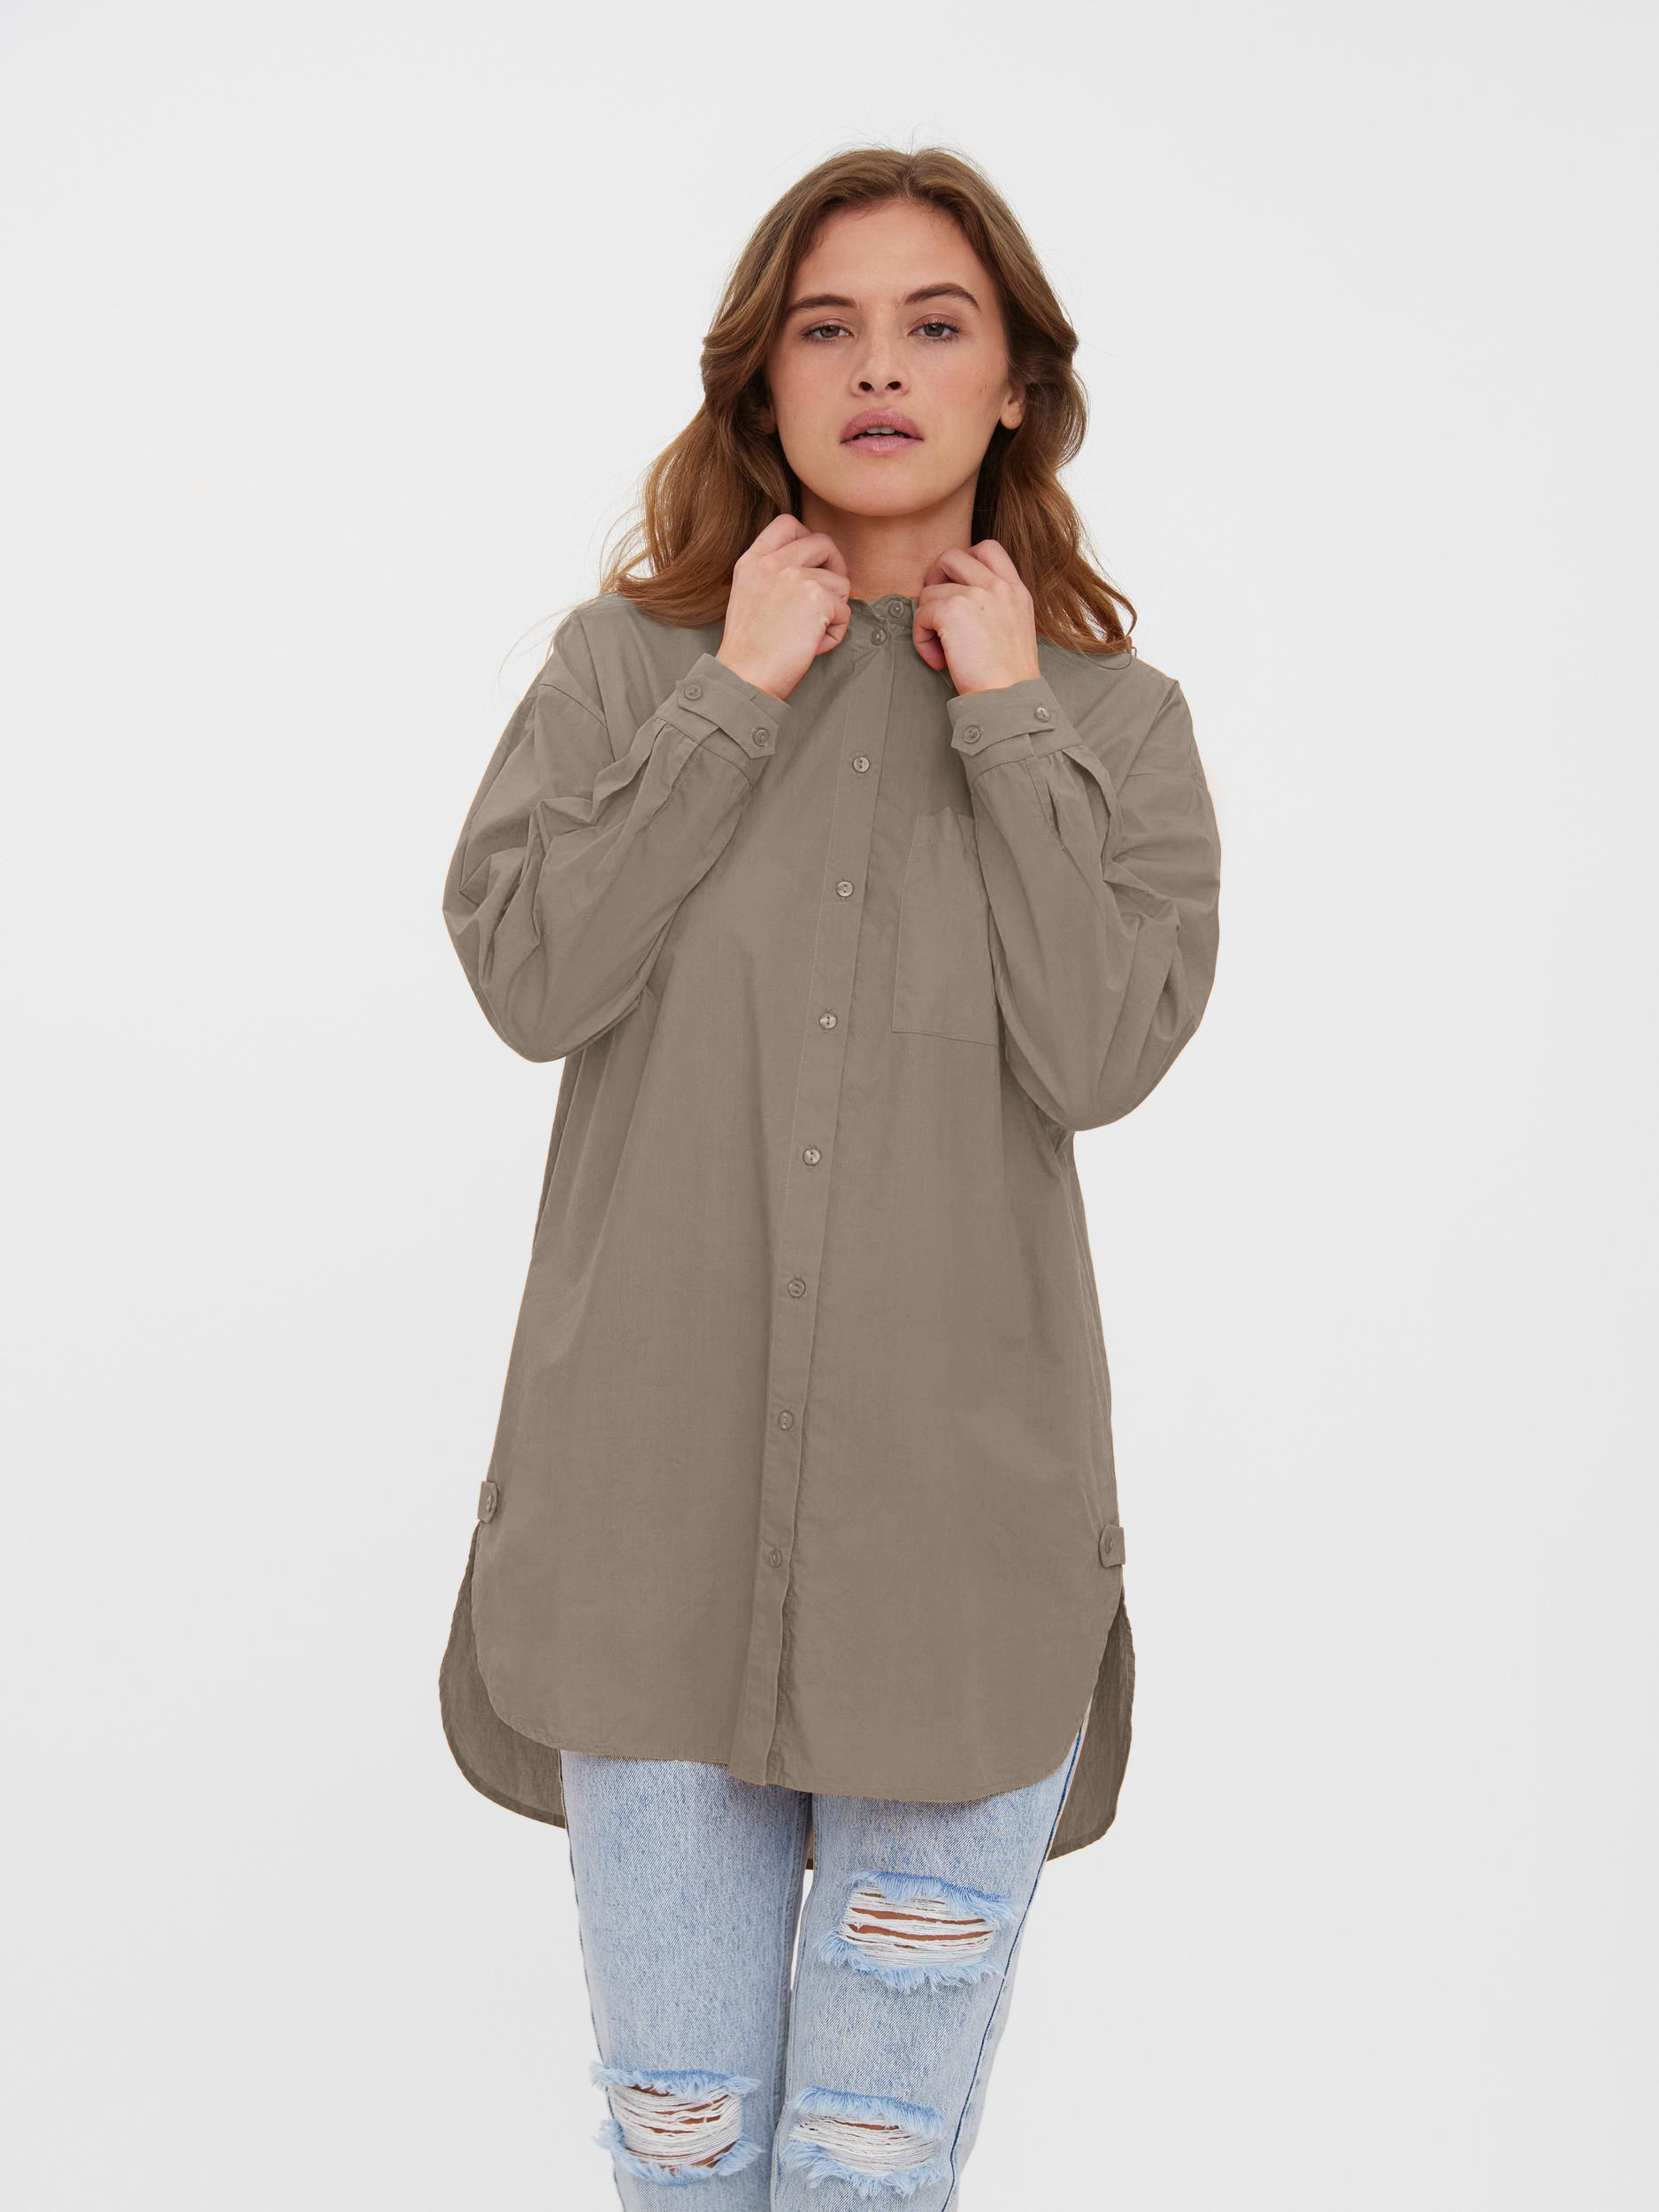 AWARE | Victory long loose-fit shirt, ROASTED CASHEW, large